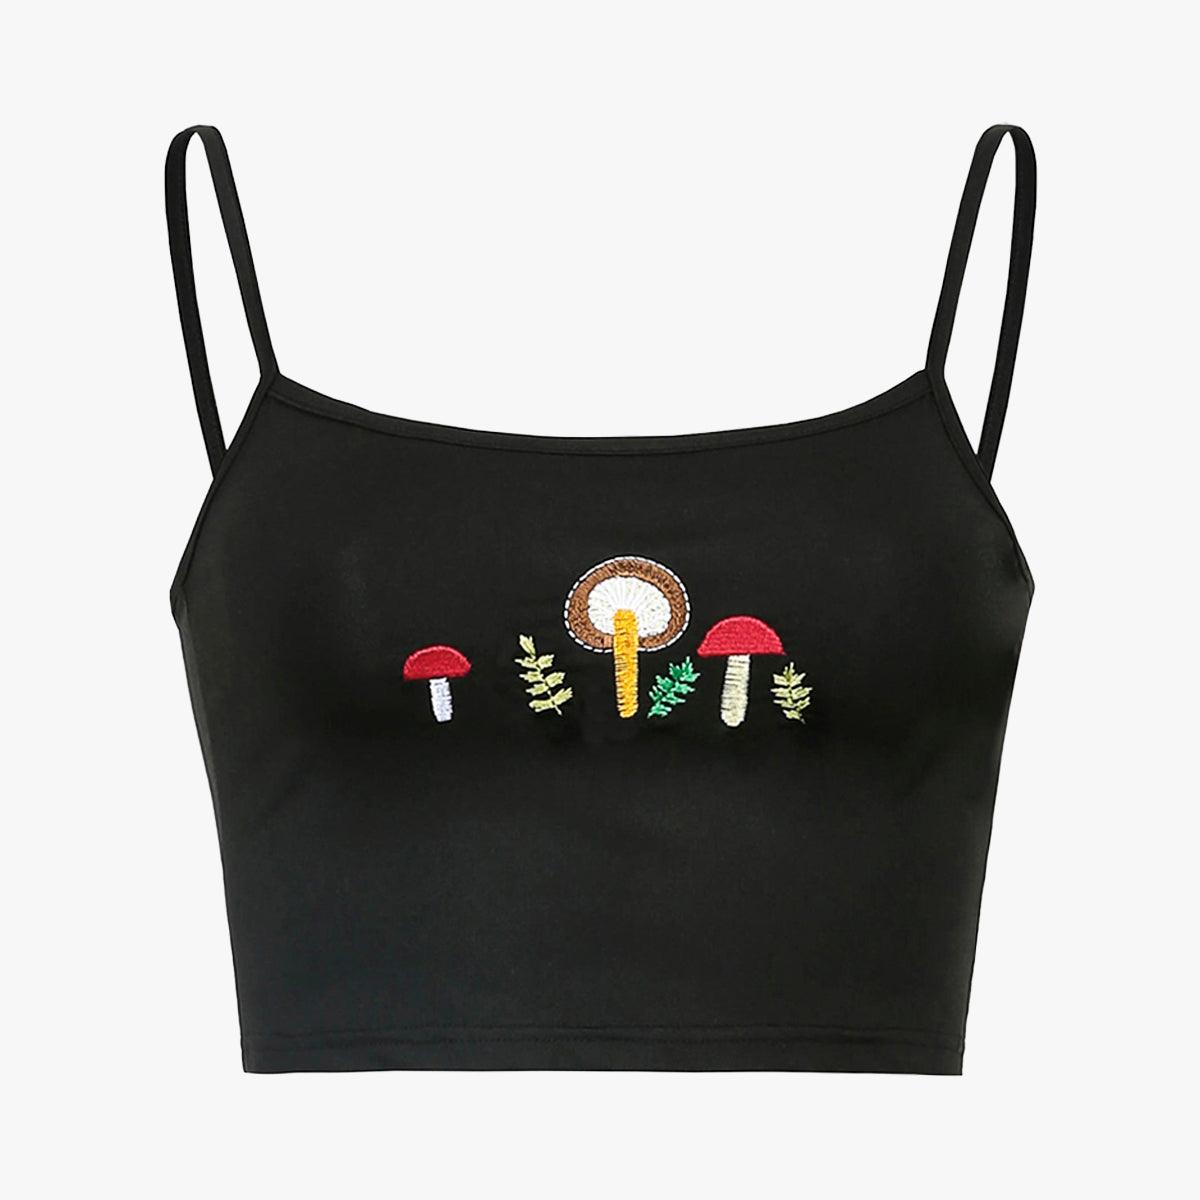 Forest Mushrooms Crop Top - Aesthetic Clothes Shop